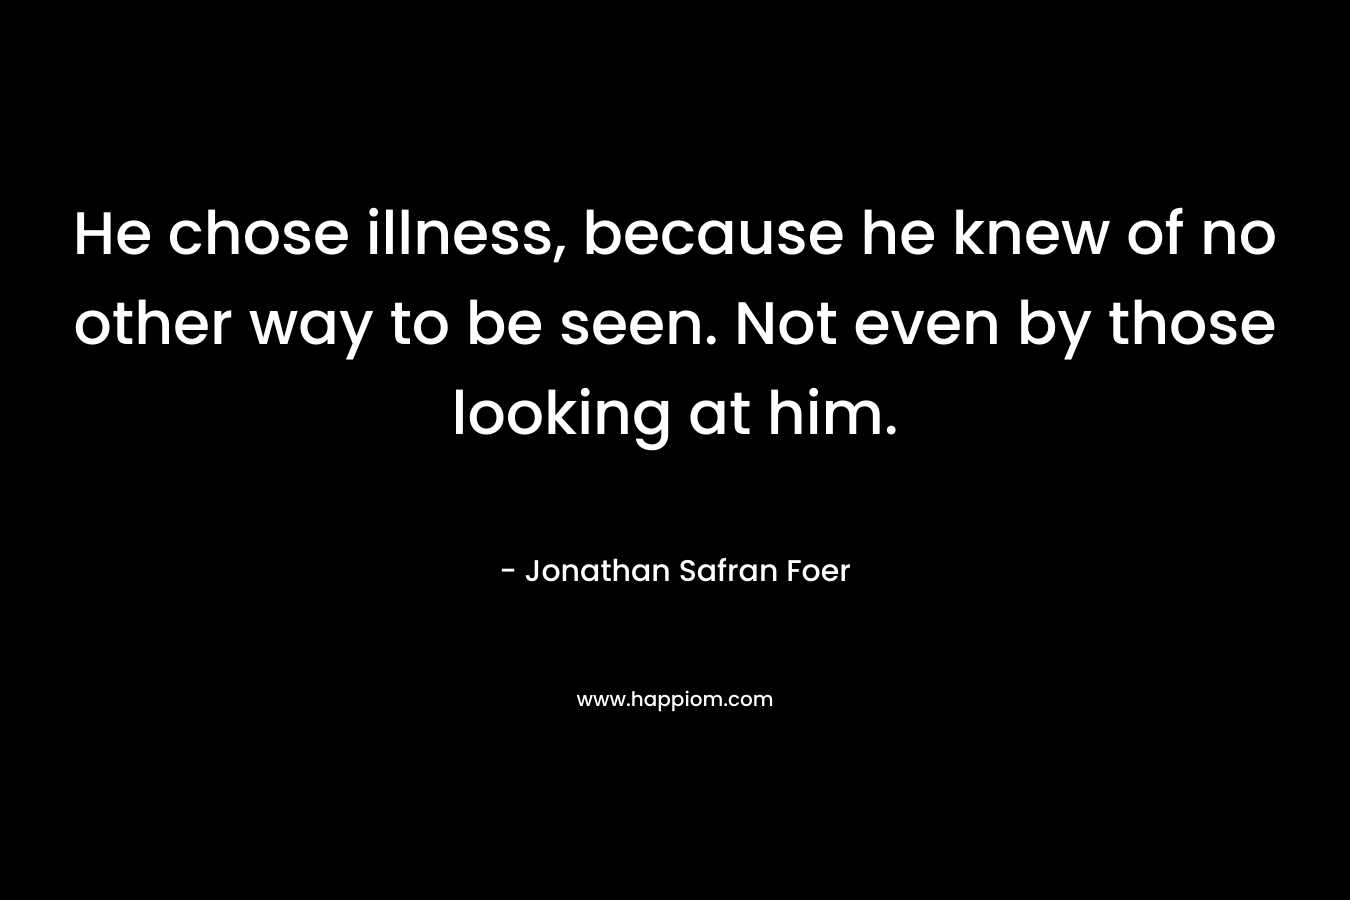 He chose illness, because he knew of no other way to be seen. Not even by those looking at him. – Jonathan Safran Foer